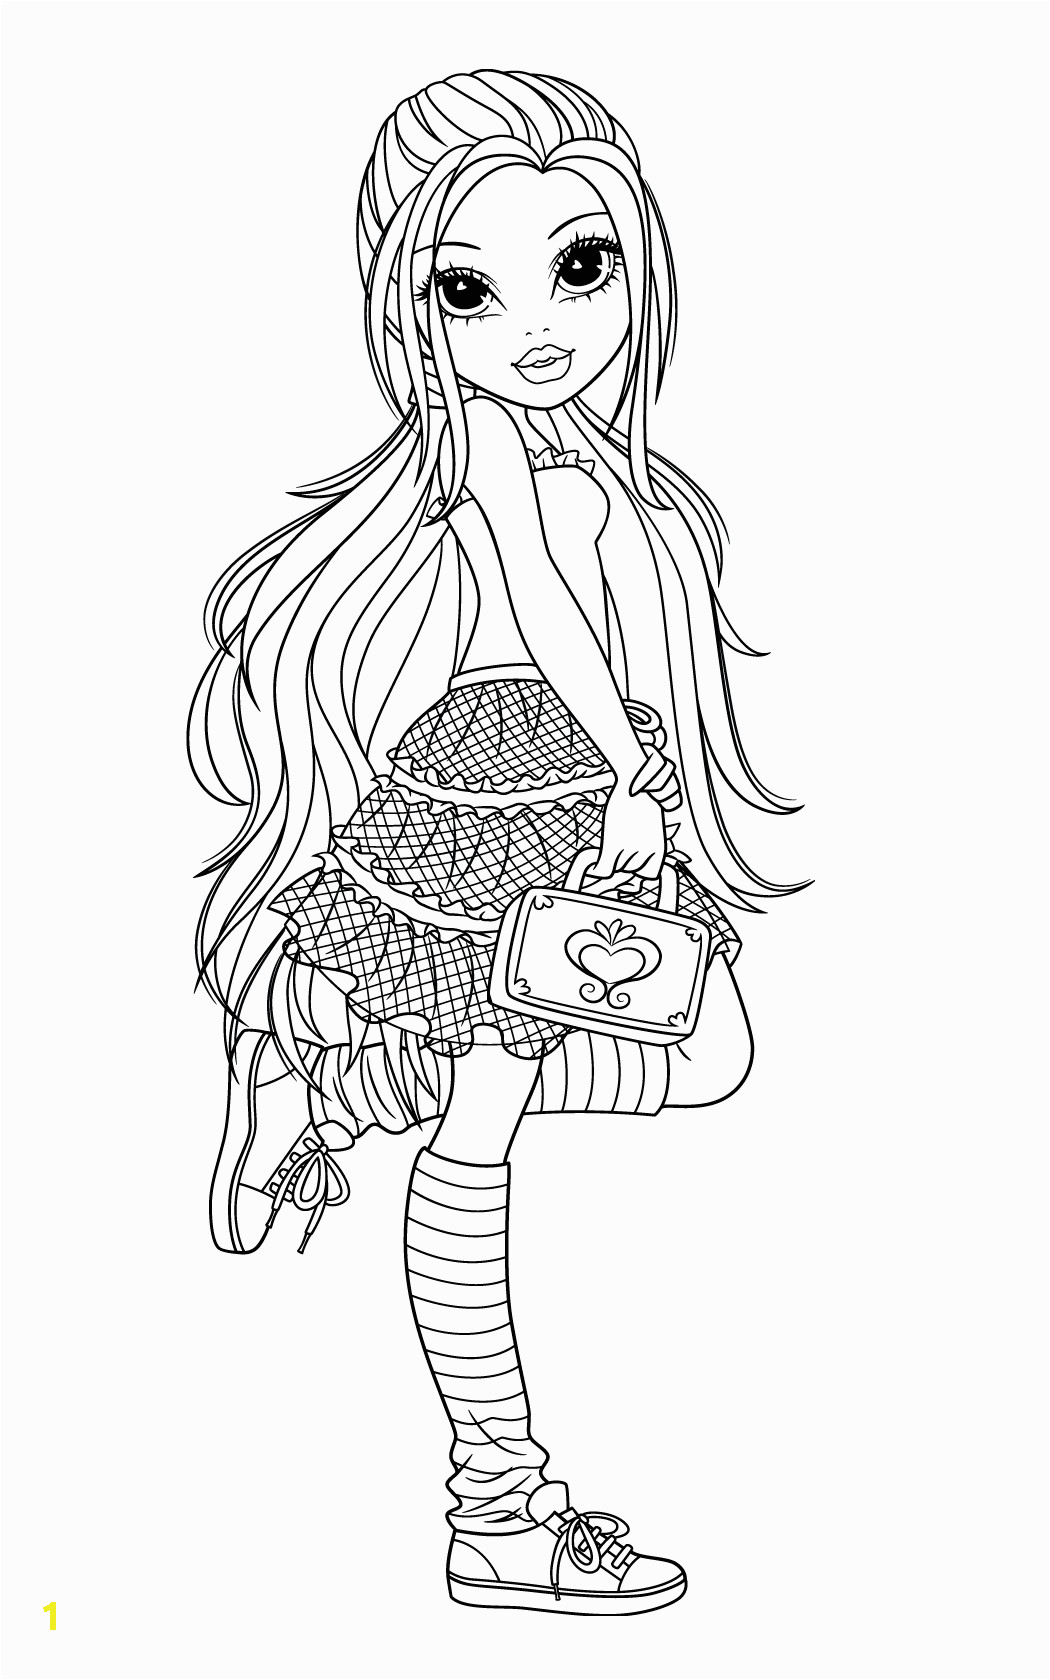 Moxie Girlz Coloring Pages to Print Moxie Girlz Coloring Pages Coloring Kids Coloring Kids